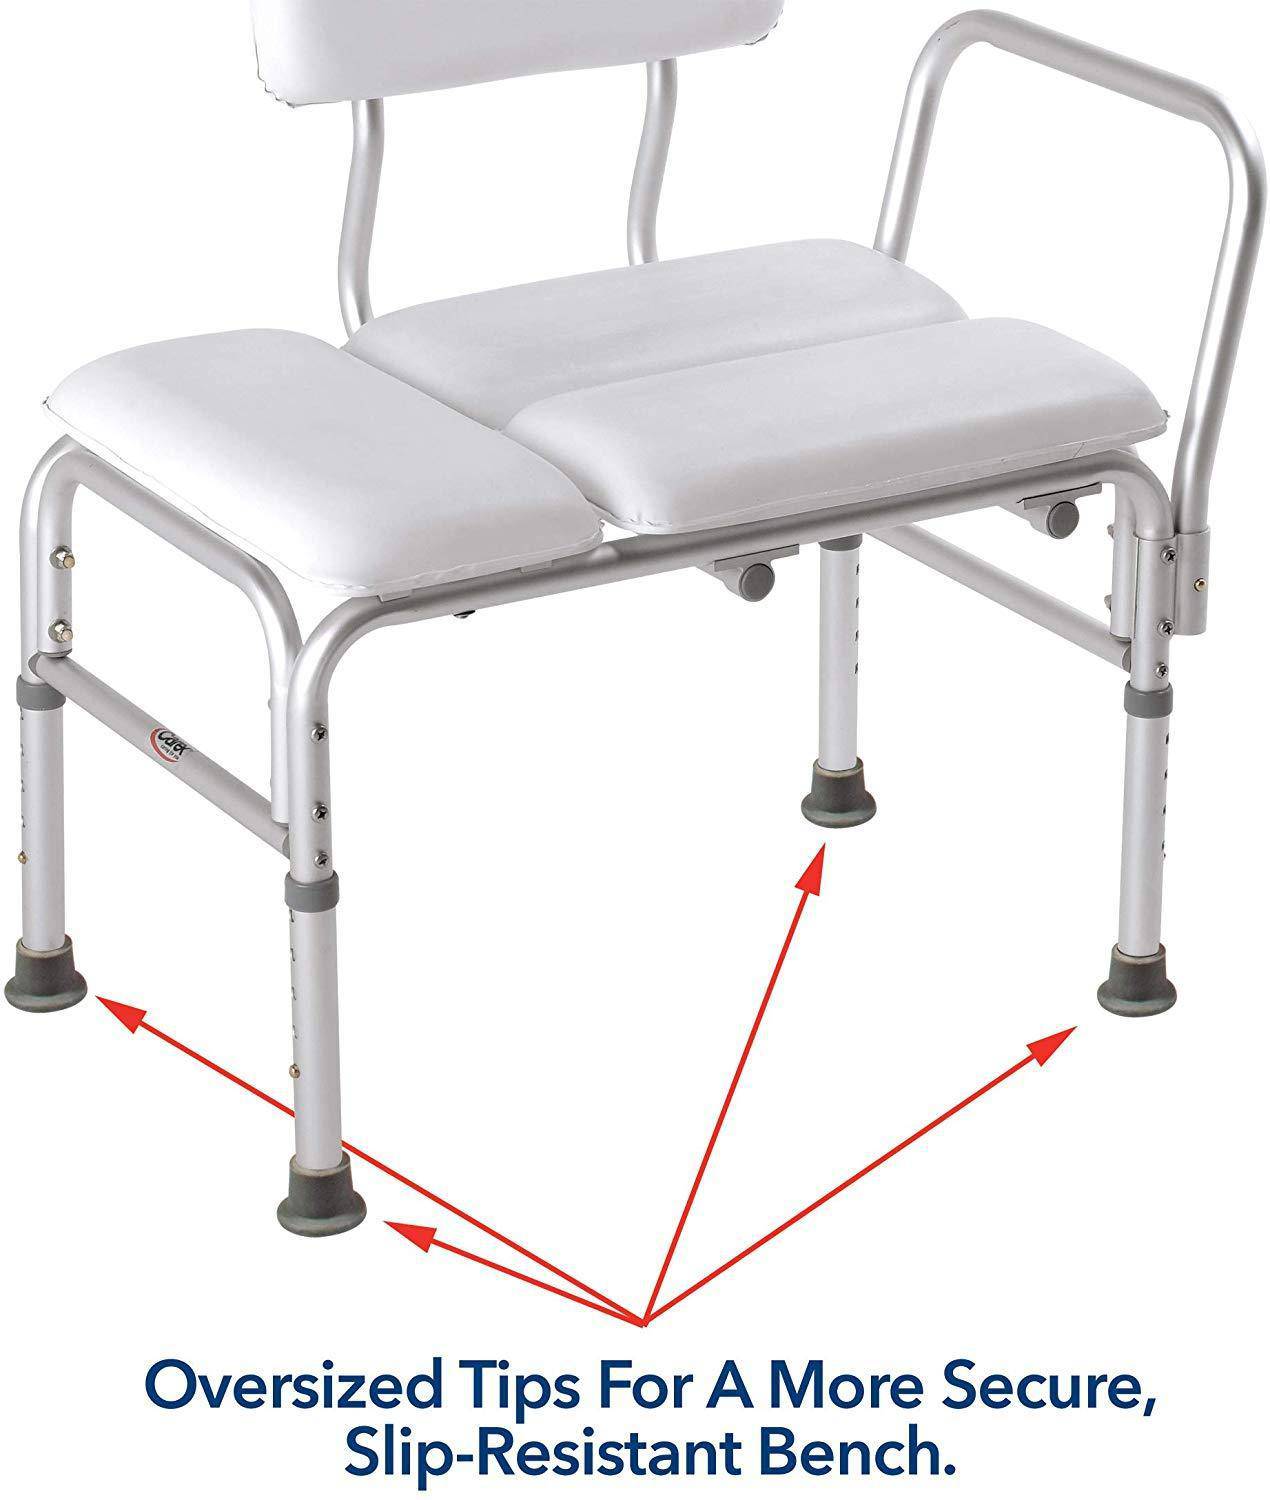 Carex Deluxe Padded Transfer Bench w/ Adjustable Height